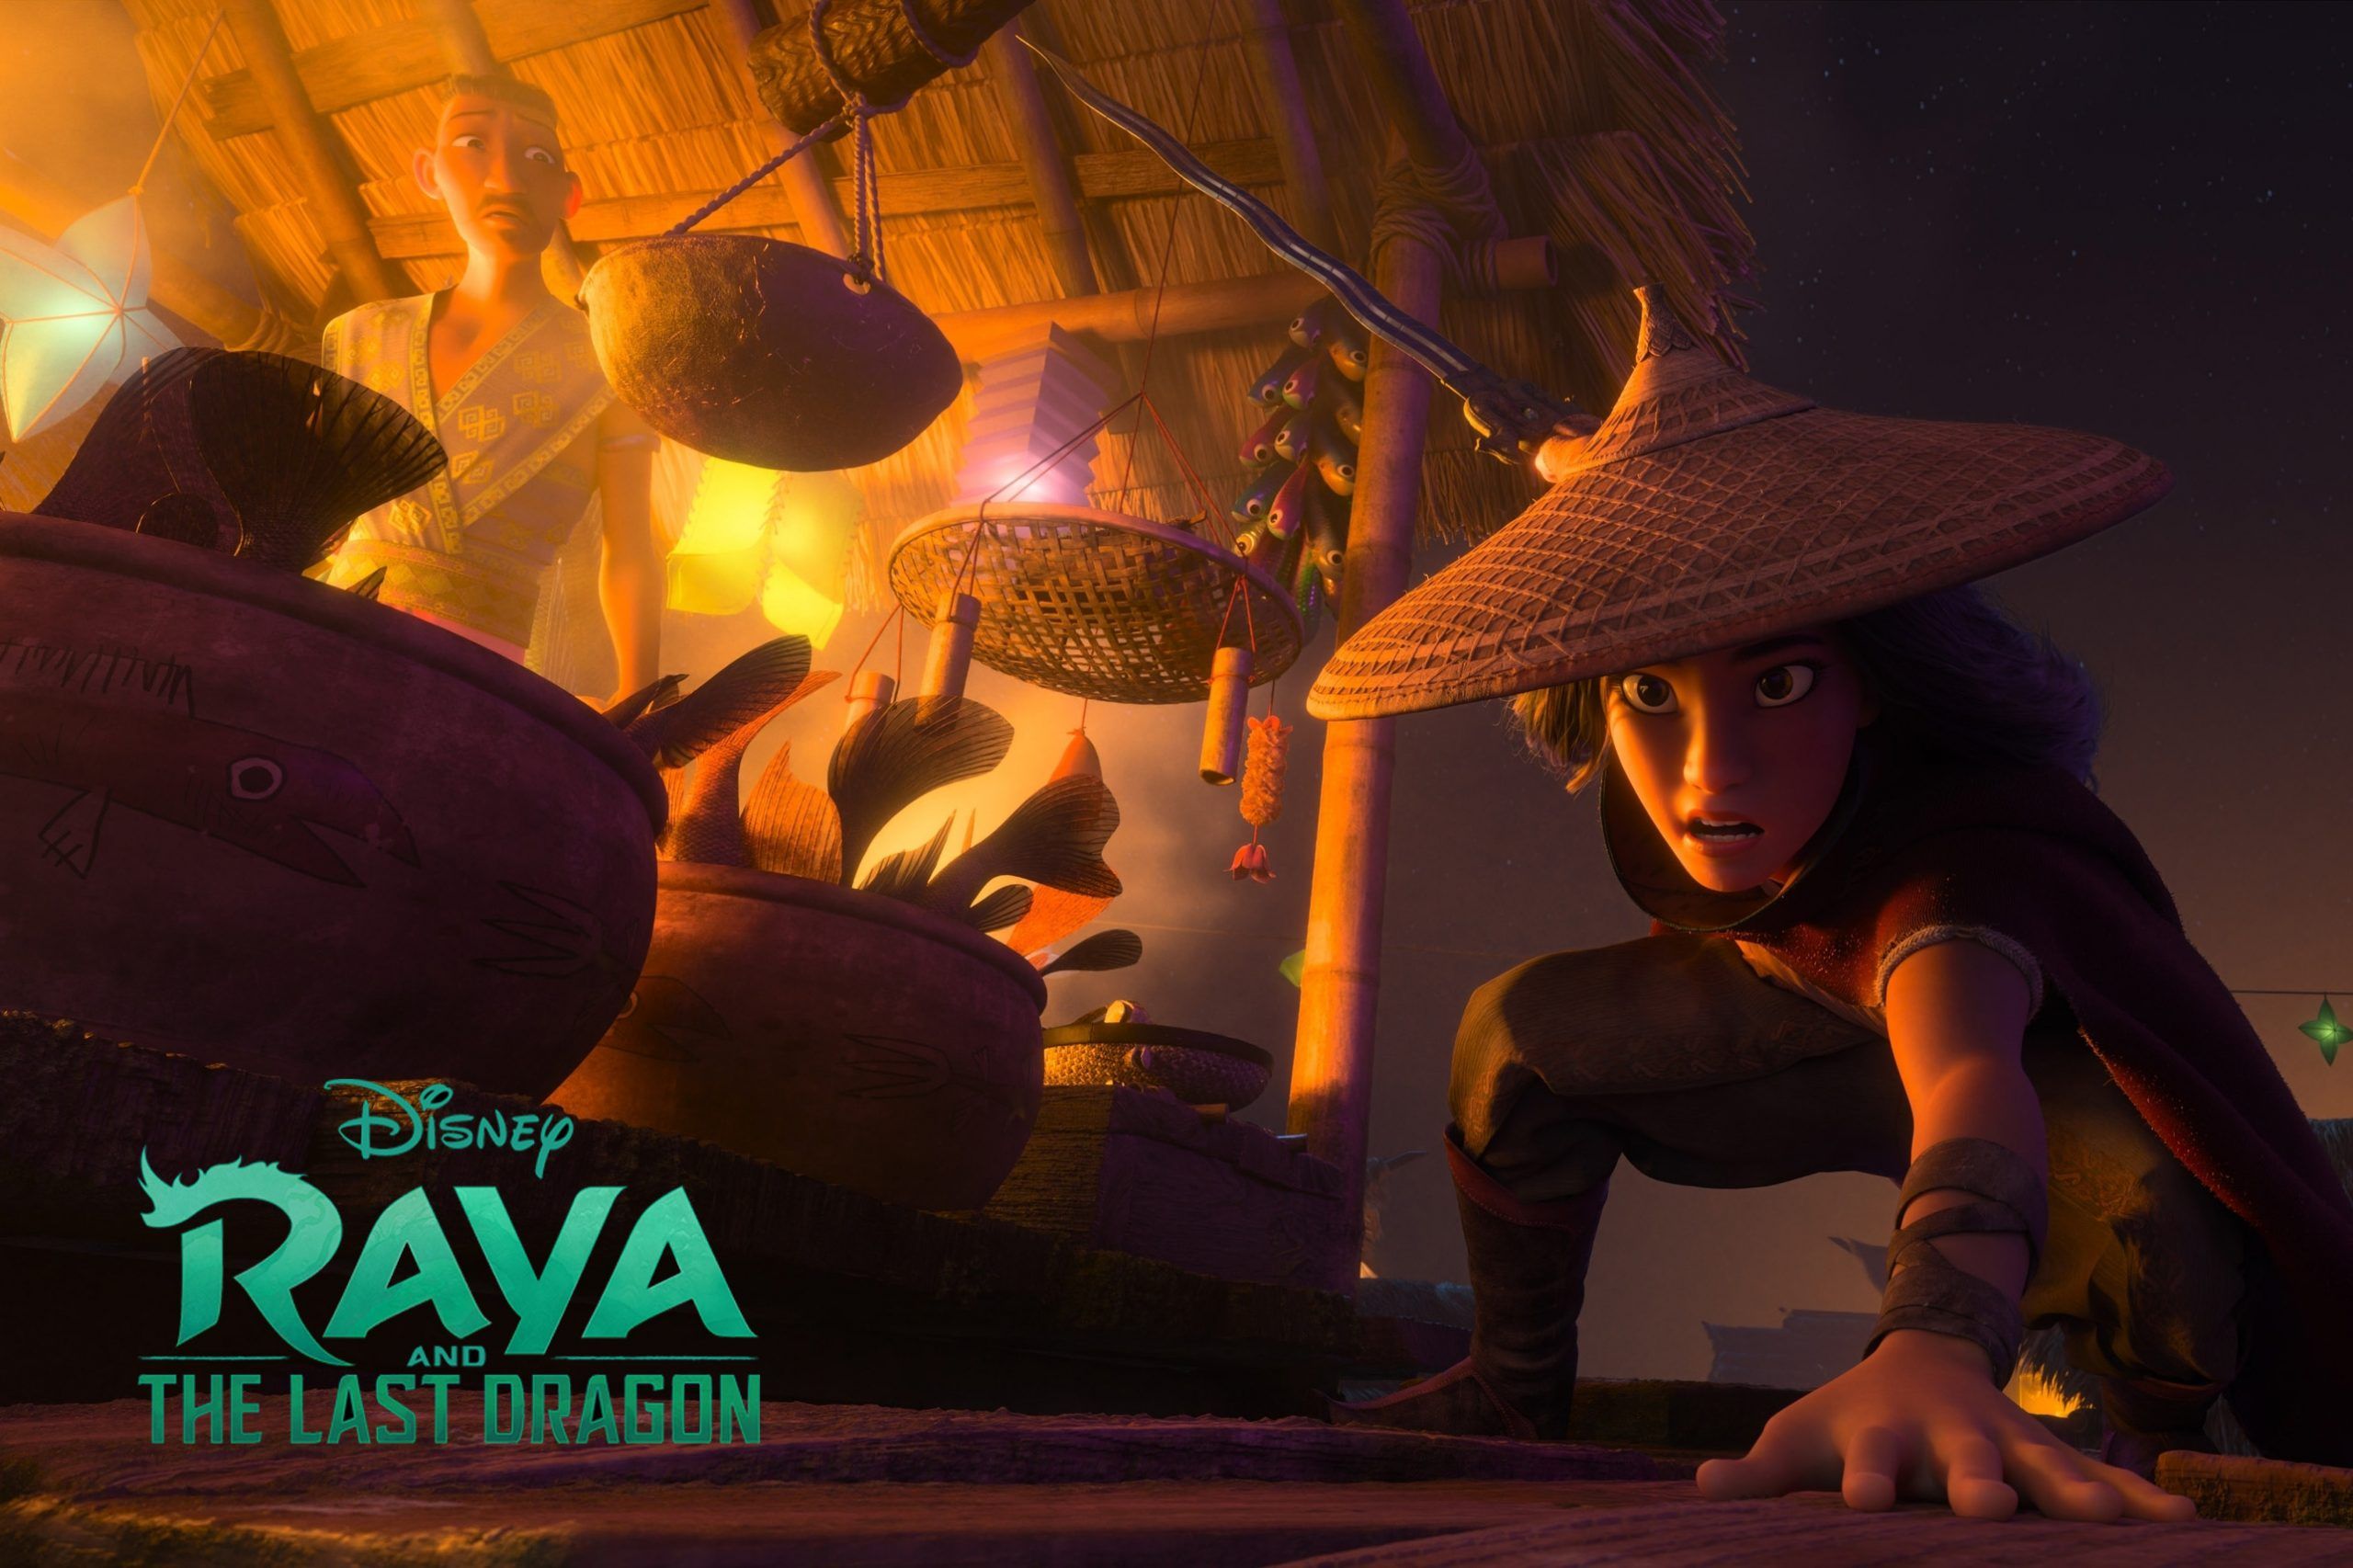 A still image from Raya and the Last Dragon